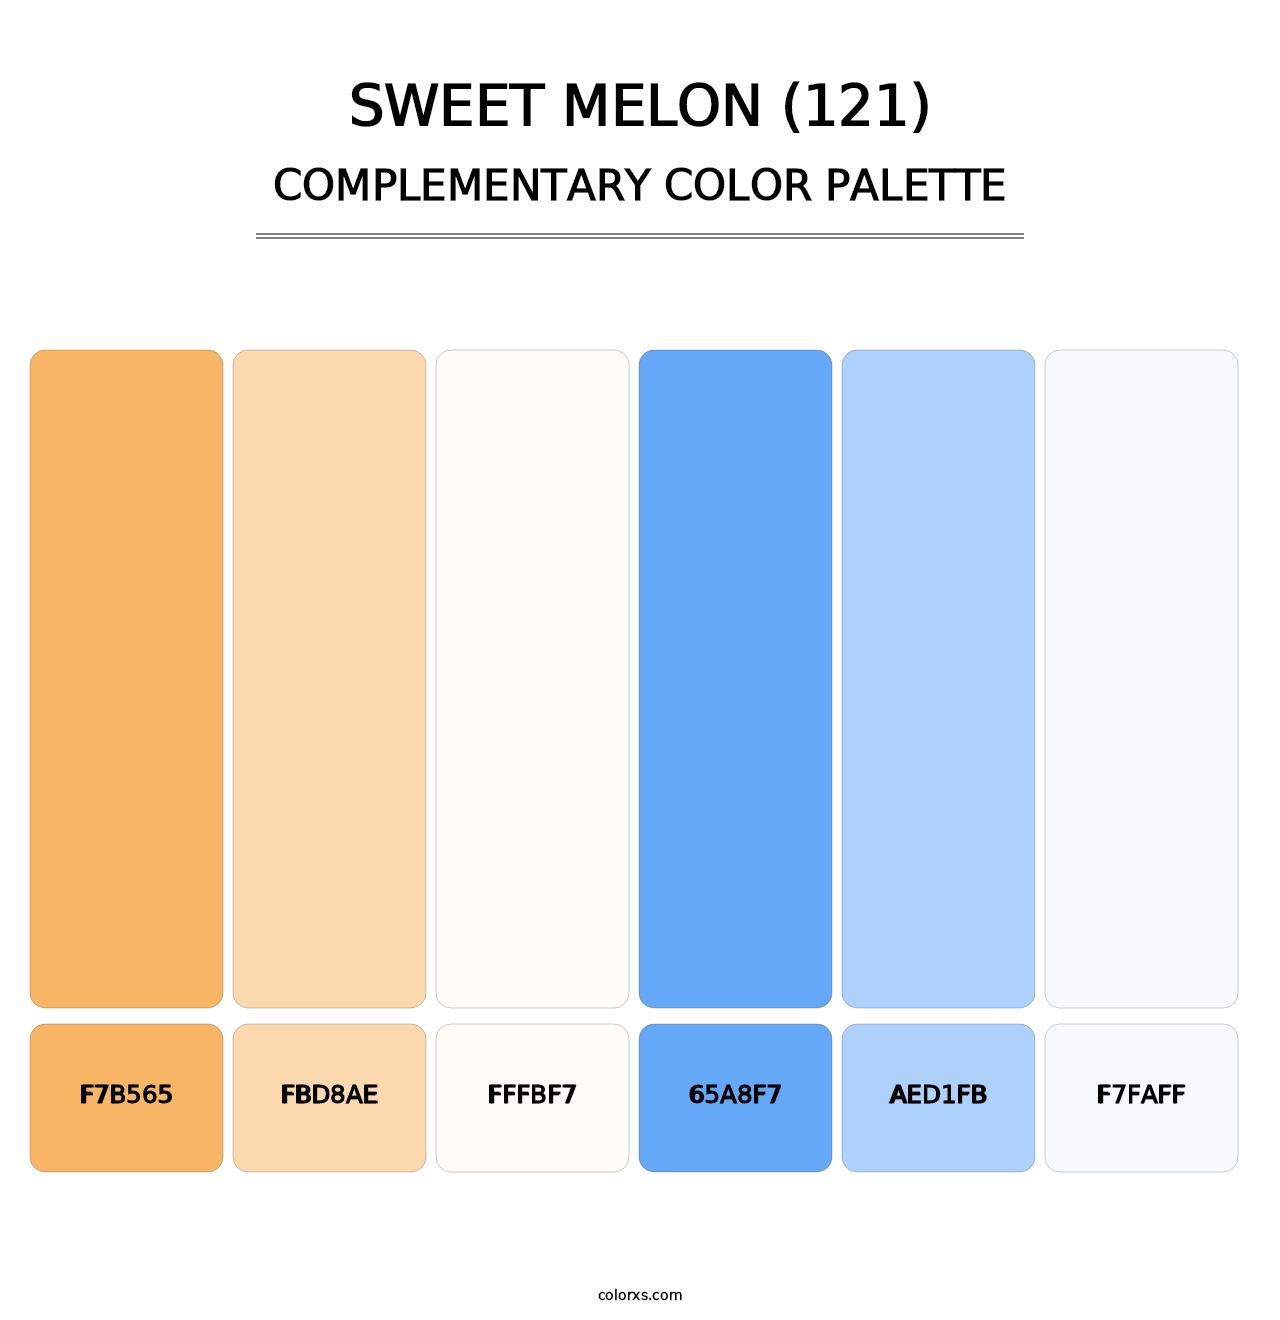 Sweet Melon (121) - Complementary Color Palette